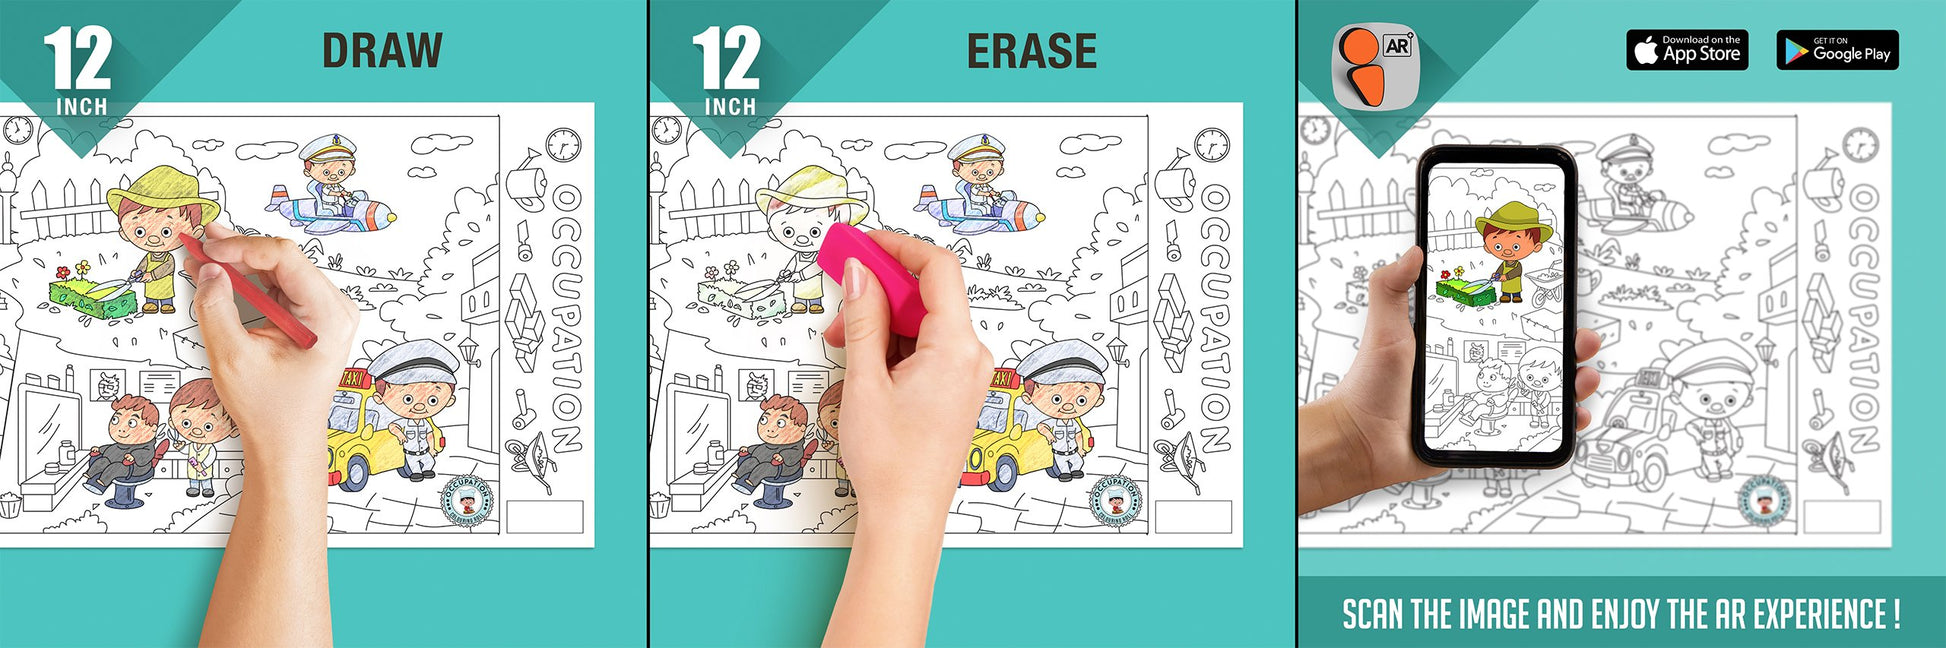  The image depicts three pictures: the first picture shows coloring with crayons, the second image portrays erasing with a normal eraser, and the third image shows scanning the image to enjoy the AR experience.